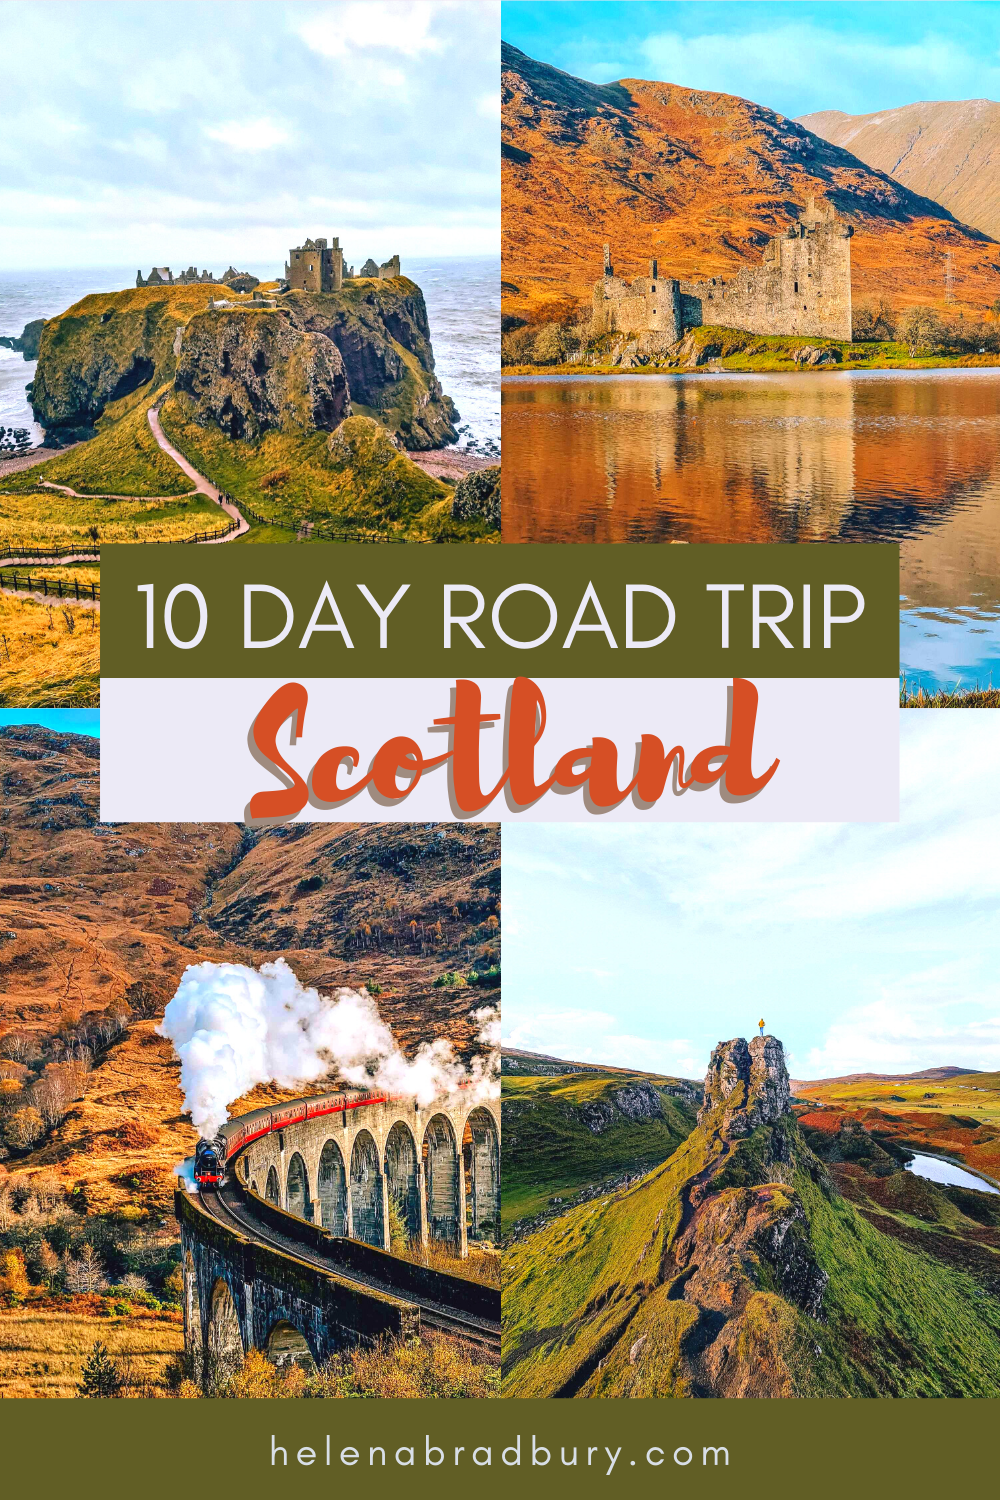 Planning 10 days in Scotland? This 10 day Scotland road trip itinerary includes everything from travel distances, advice for weather conditions, Scottish attractions to visit, plus accommodation throughout to plan the ultimate Scotland itinerary | sc